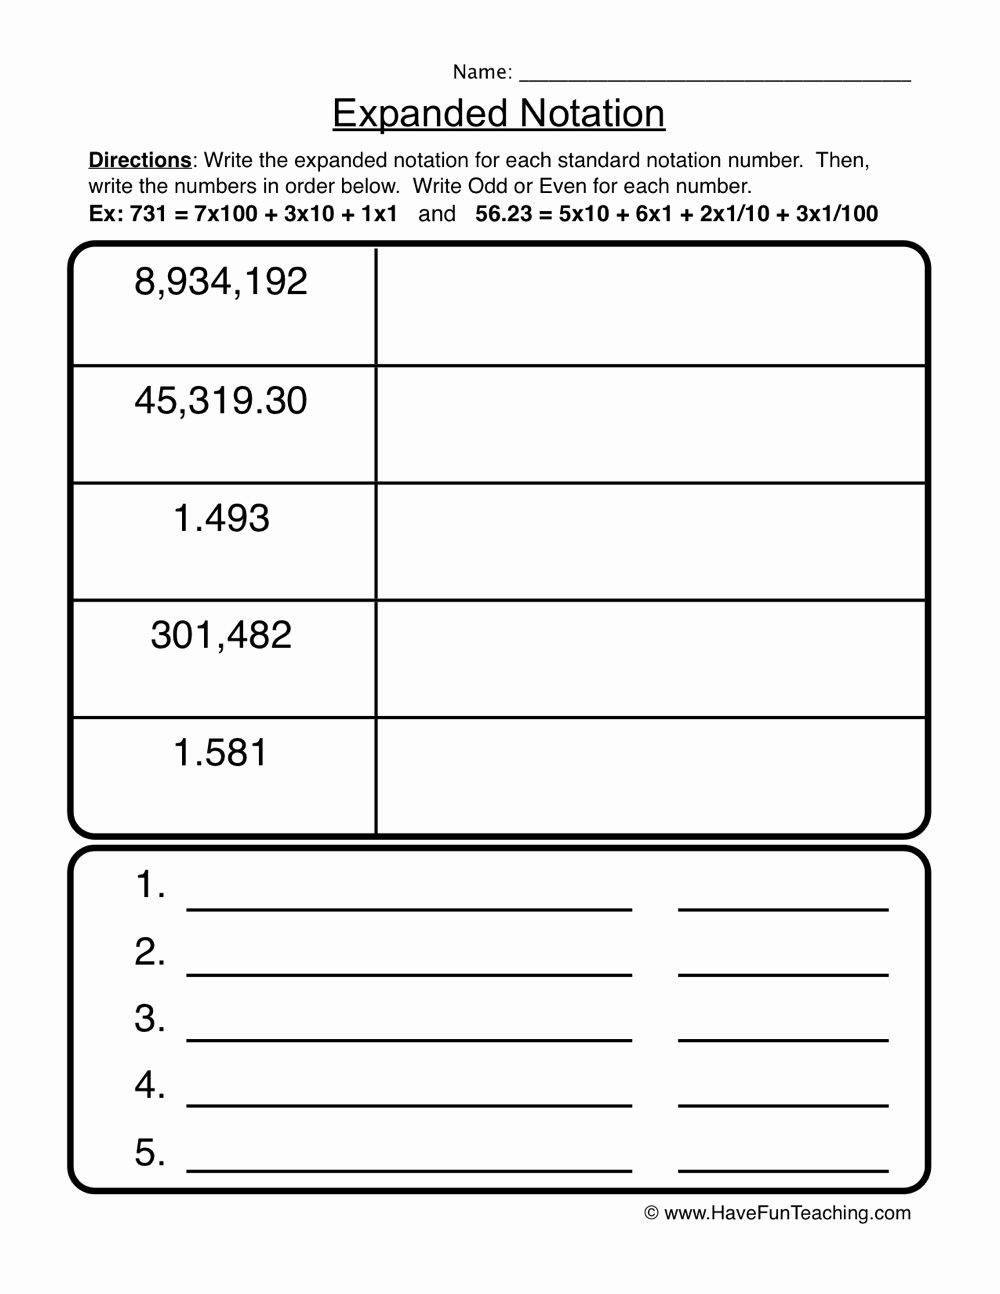 Expanded Notation Worksheets Luxury Expanded Notation Place Value Worksheet • Have Fun Teaching